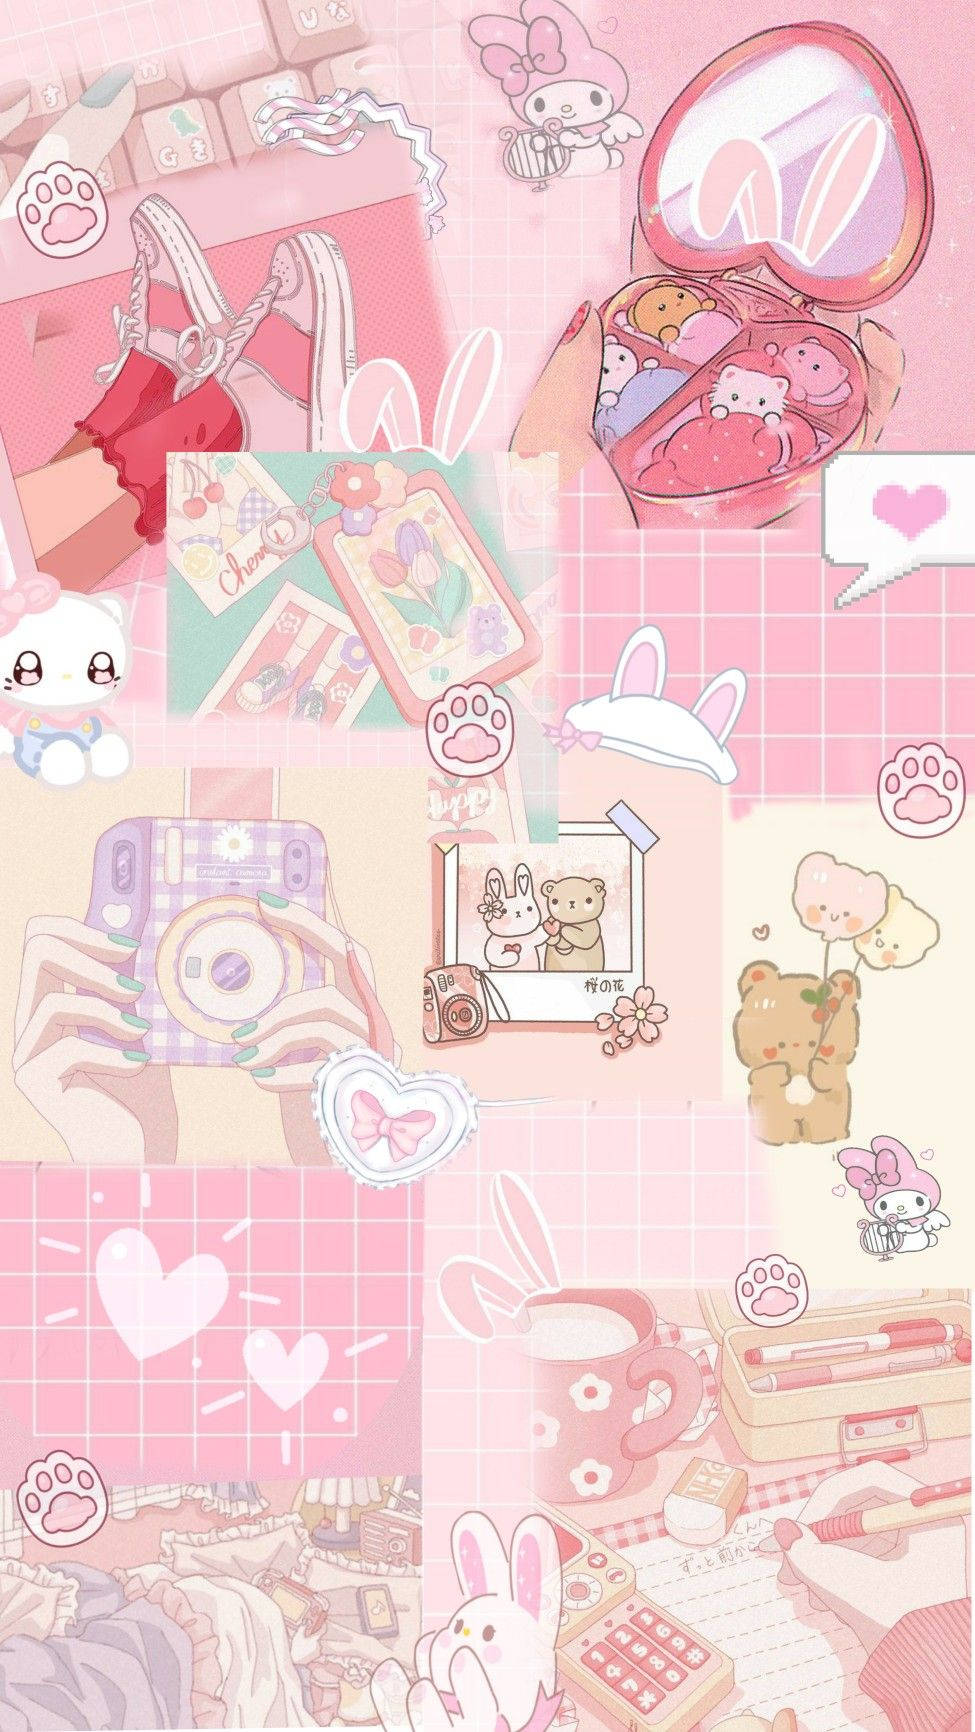 Aesthetic background of a pink and white grid with cartoon drawings of animals and objects. - Pink anime